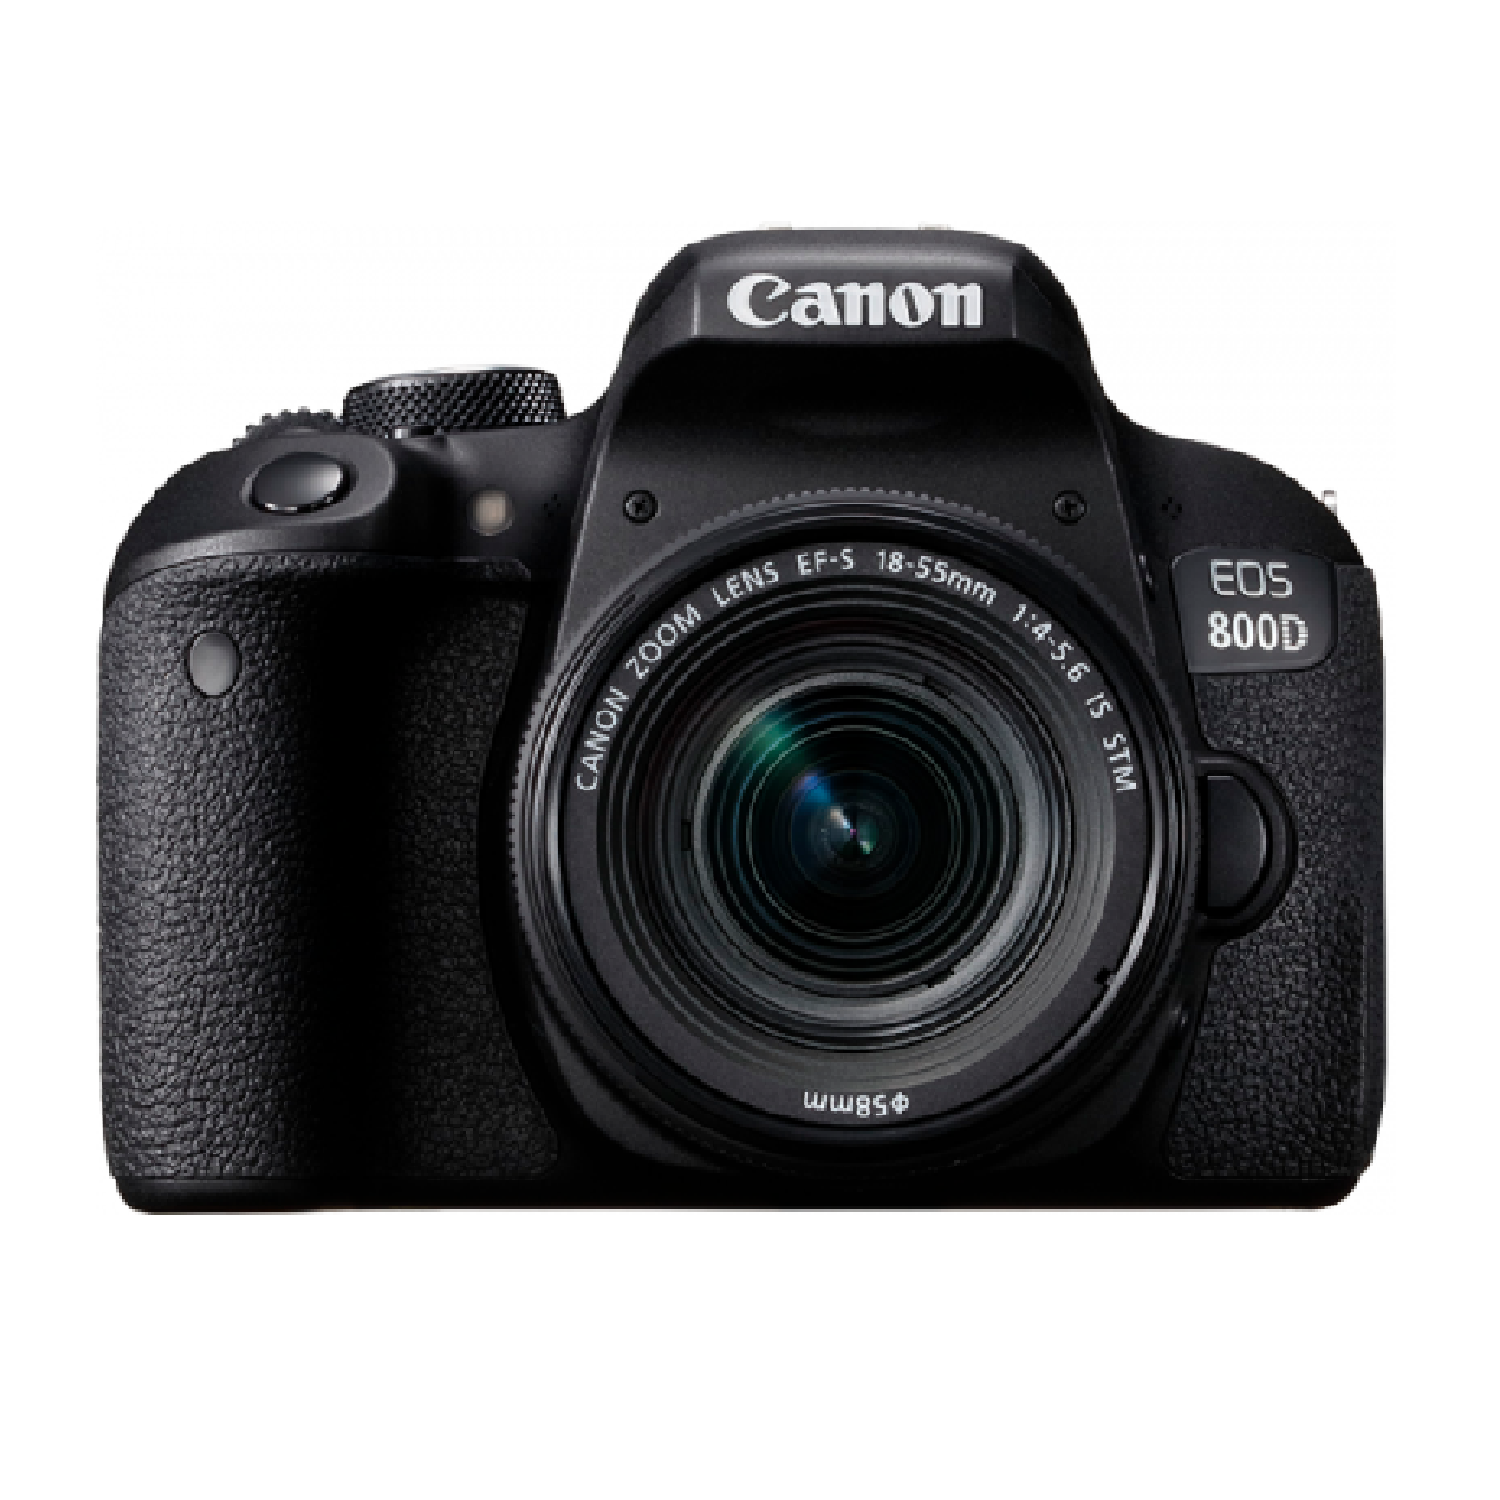 24.2 Megapixel APS-C CMOS Sensor 3.0 Inches 1.04m Dot Vari-Angel Touchscreen Full HD 1080p at 60 fps Wifi with NFC Bluetooth Connectivity   EOS 800D (W) with 18 55 IS STM canon